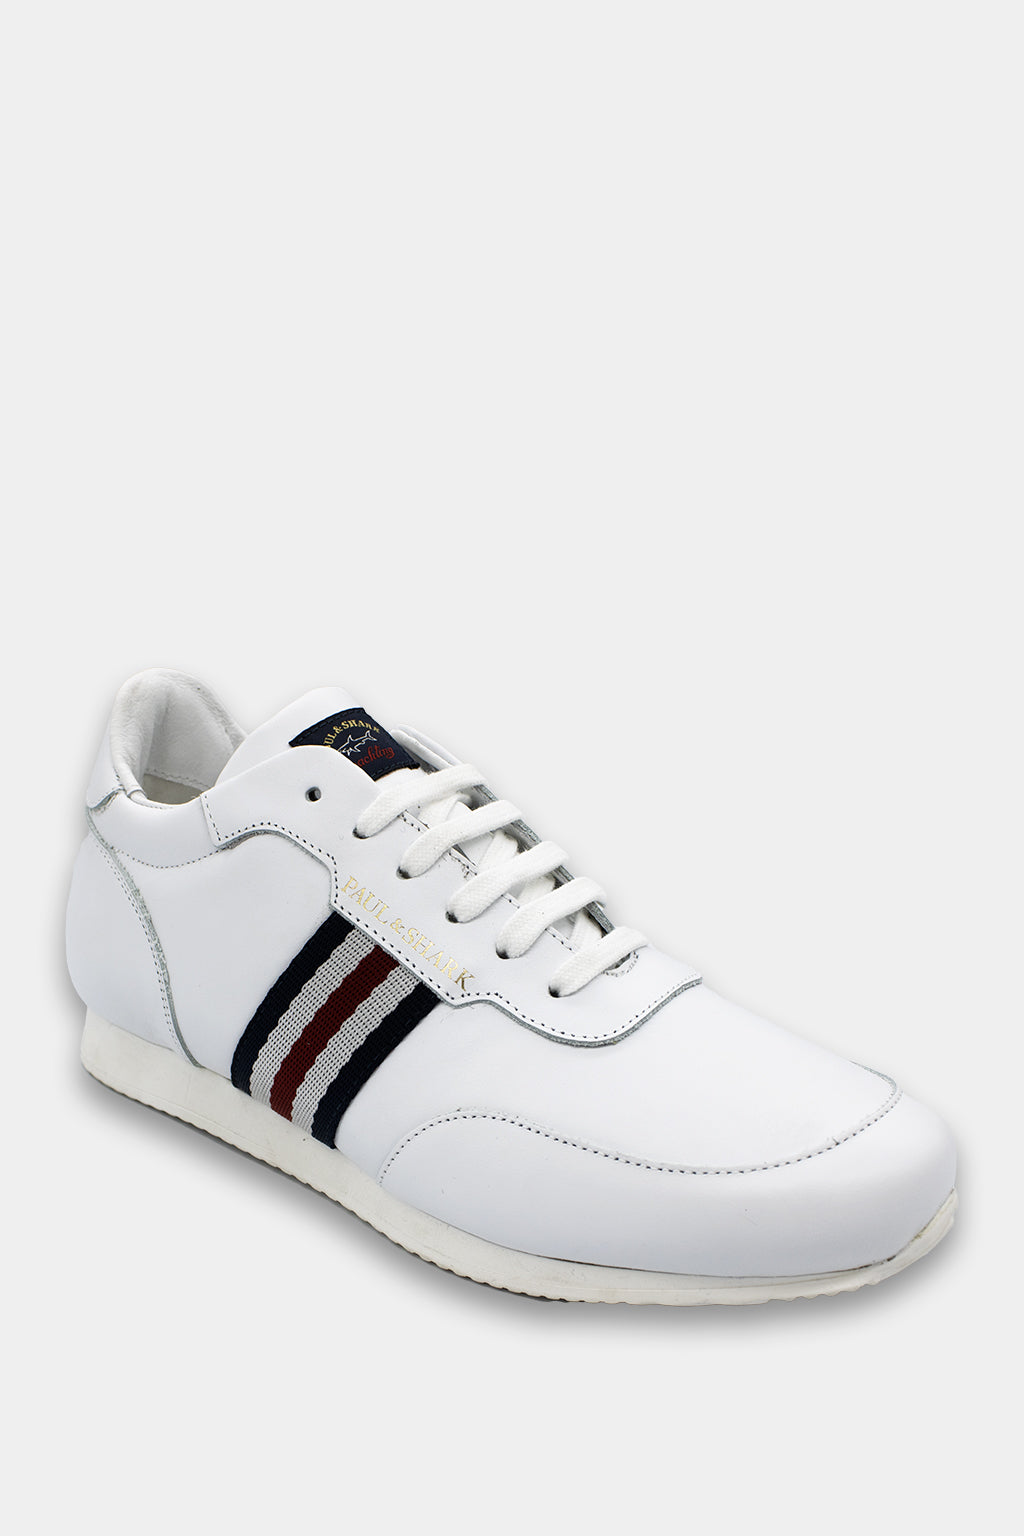 Paul & Shark Yachting - Leather Sneaker Shoes